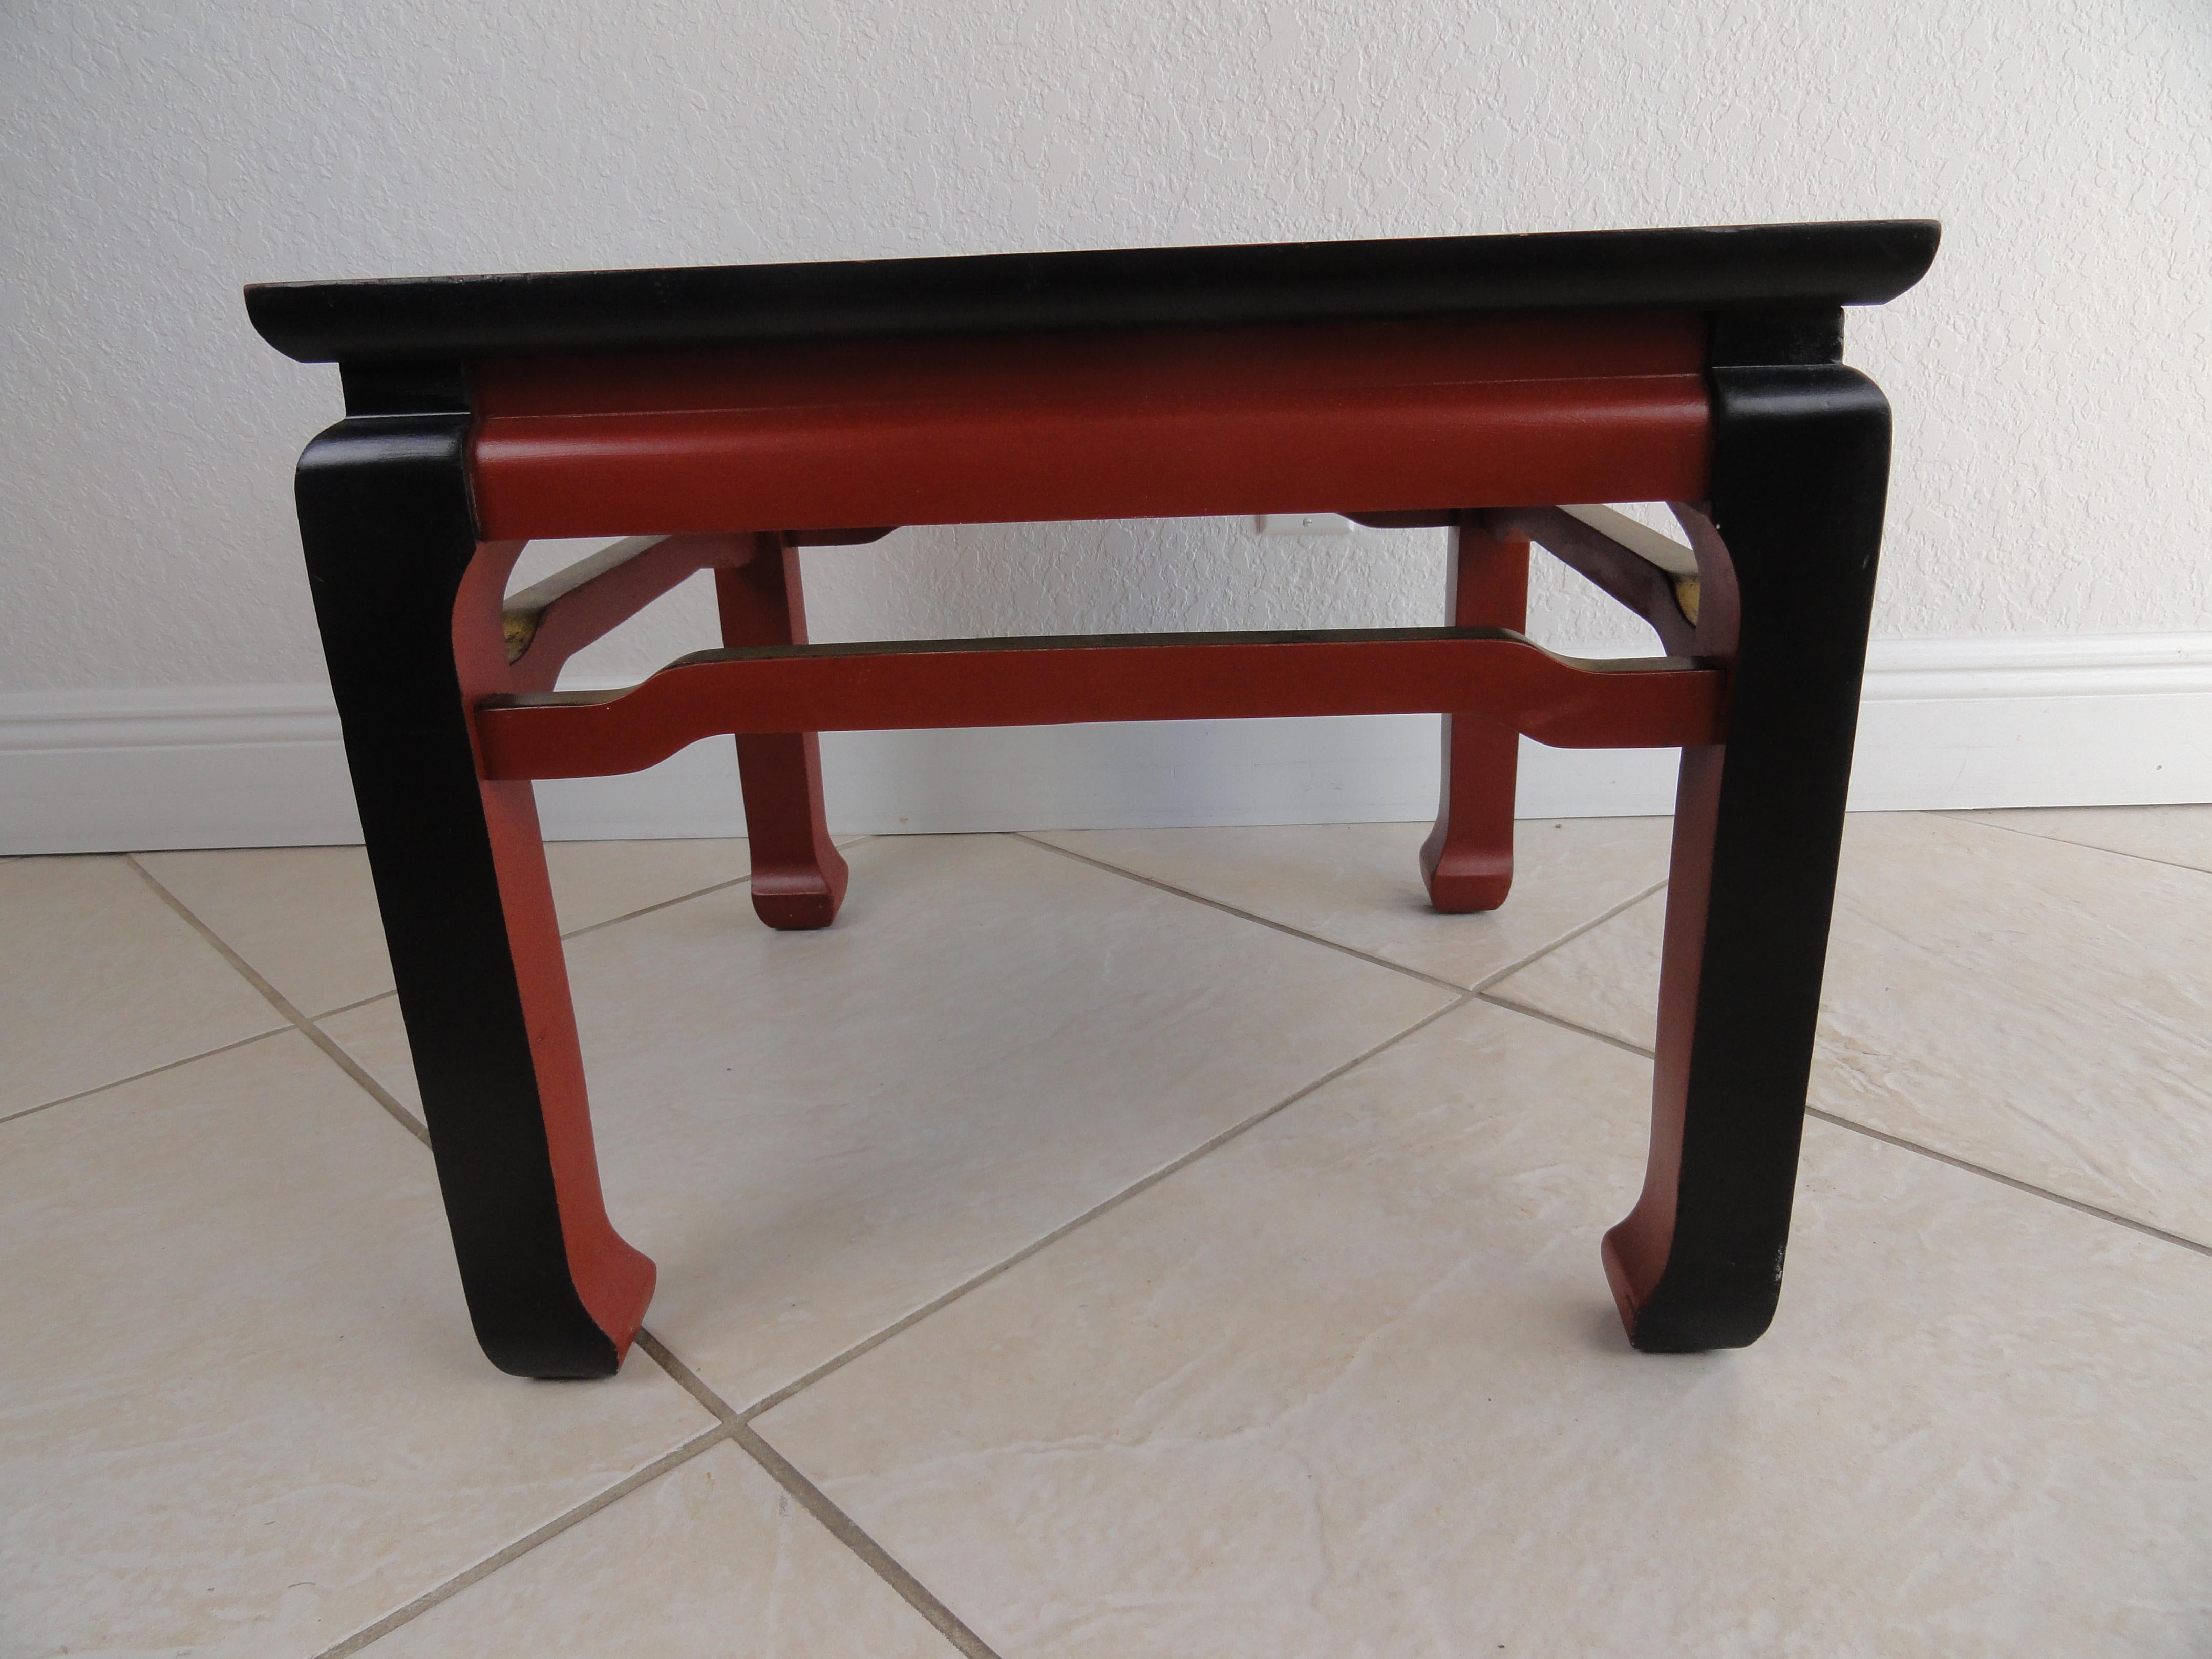 Painted Ming-style table. Painted in black, red and gold-leaf on top, 20th century.